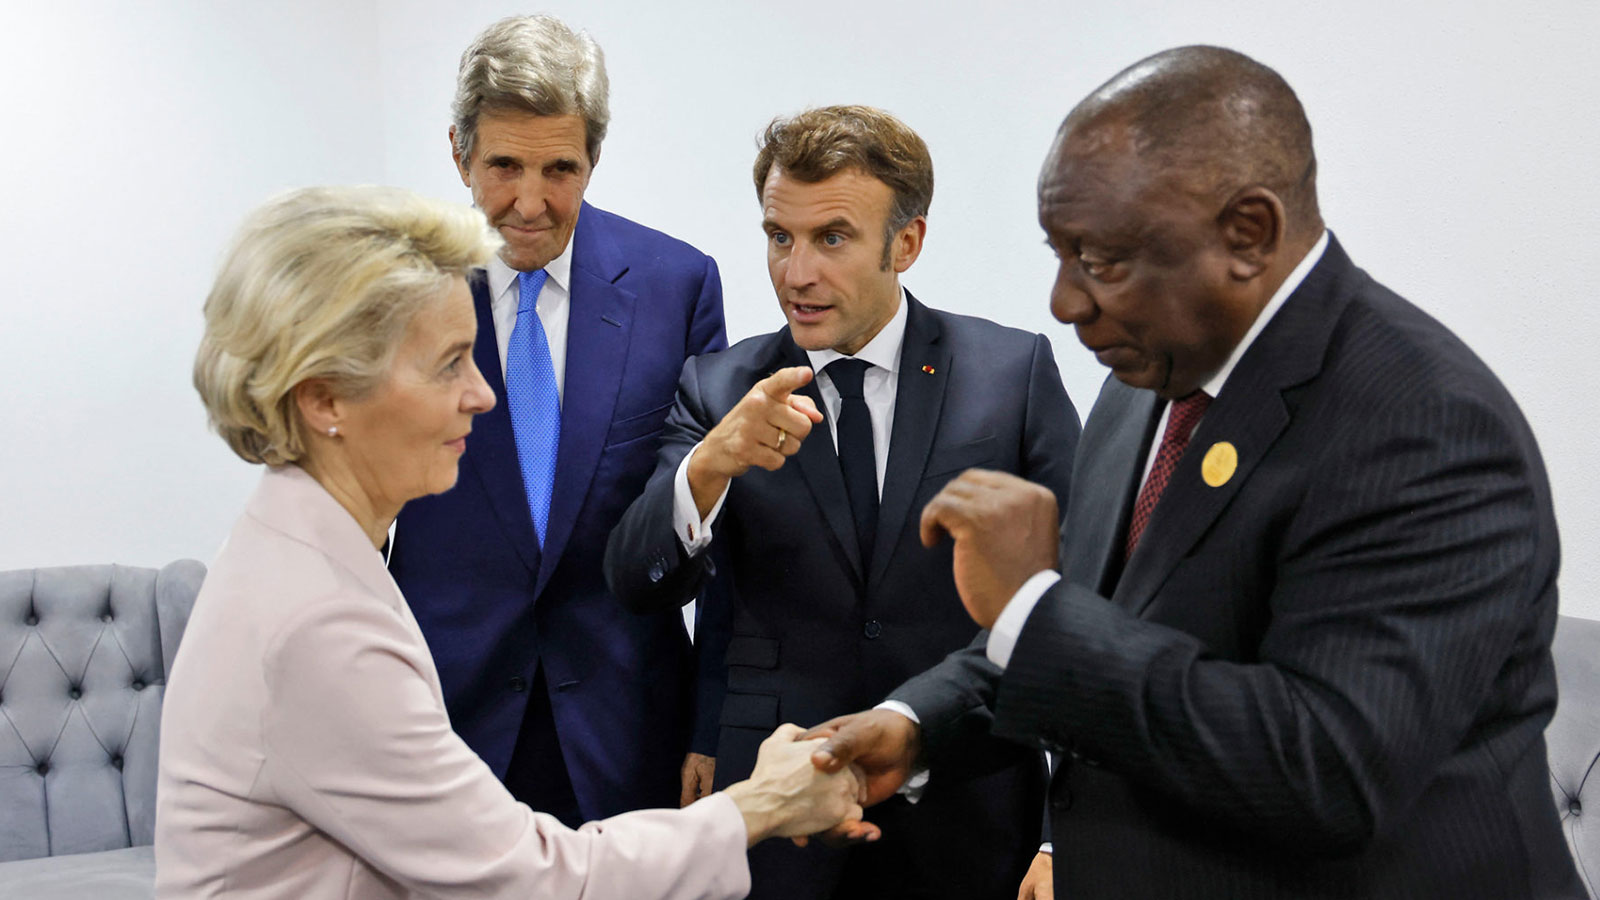 Ursula von der Leyen, President of the European Commission, and South African President Cyril Ramaphosa greet each other at COP27 as Emanuel Macron, President of France, and John Kerry, US special envoy for the climate, look on. 